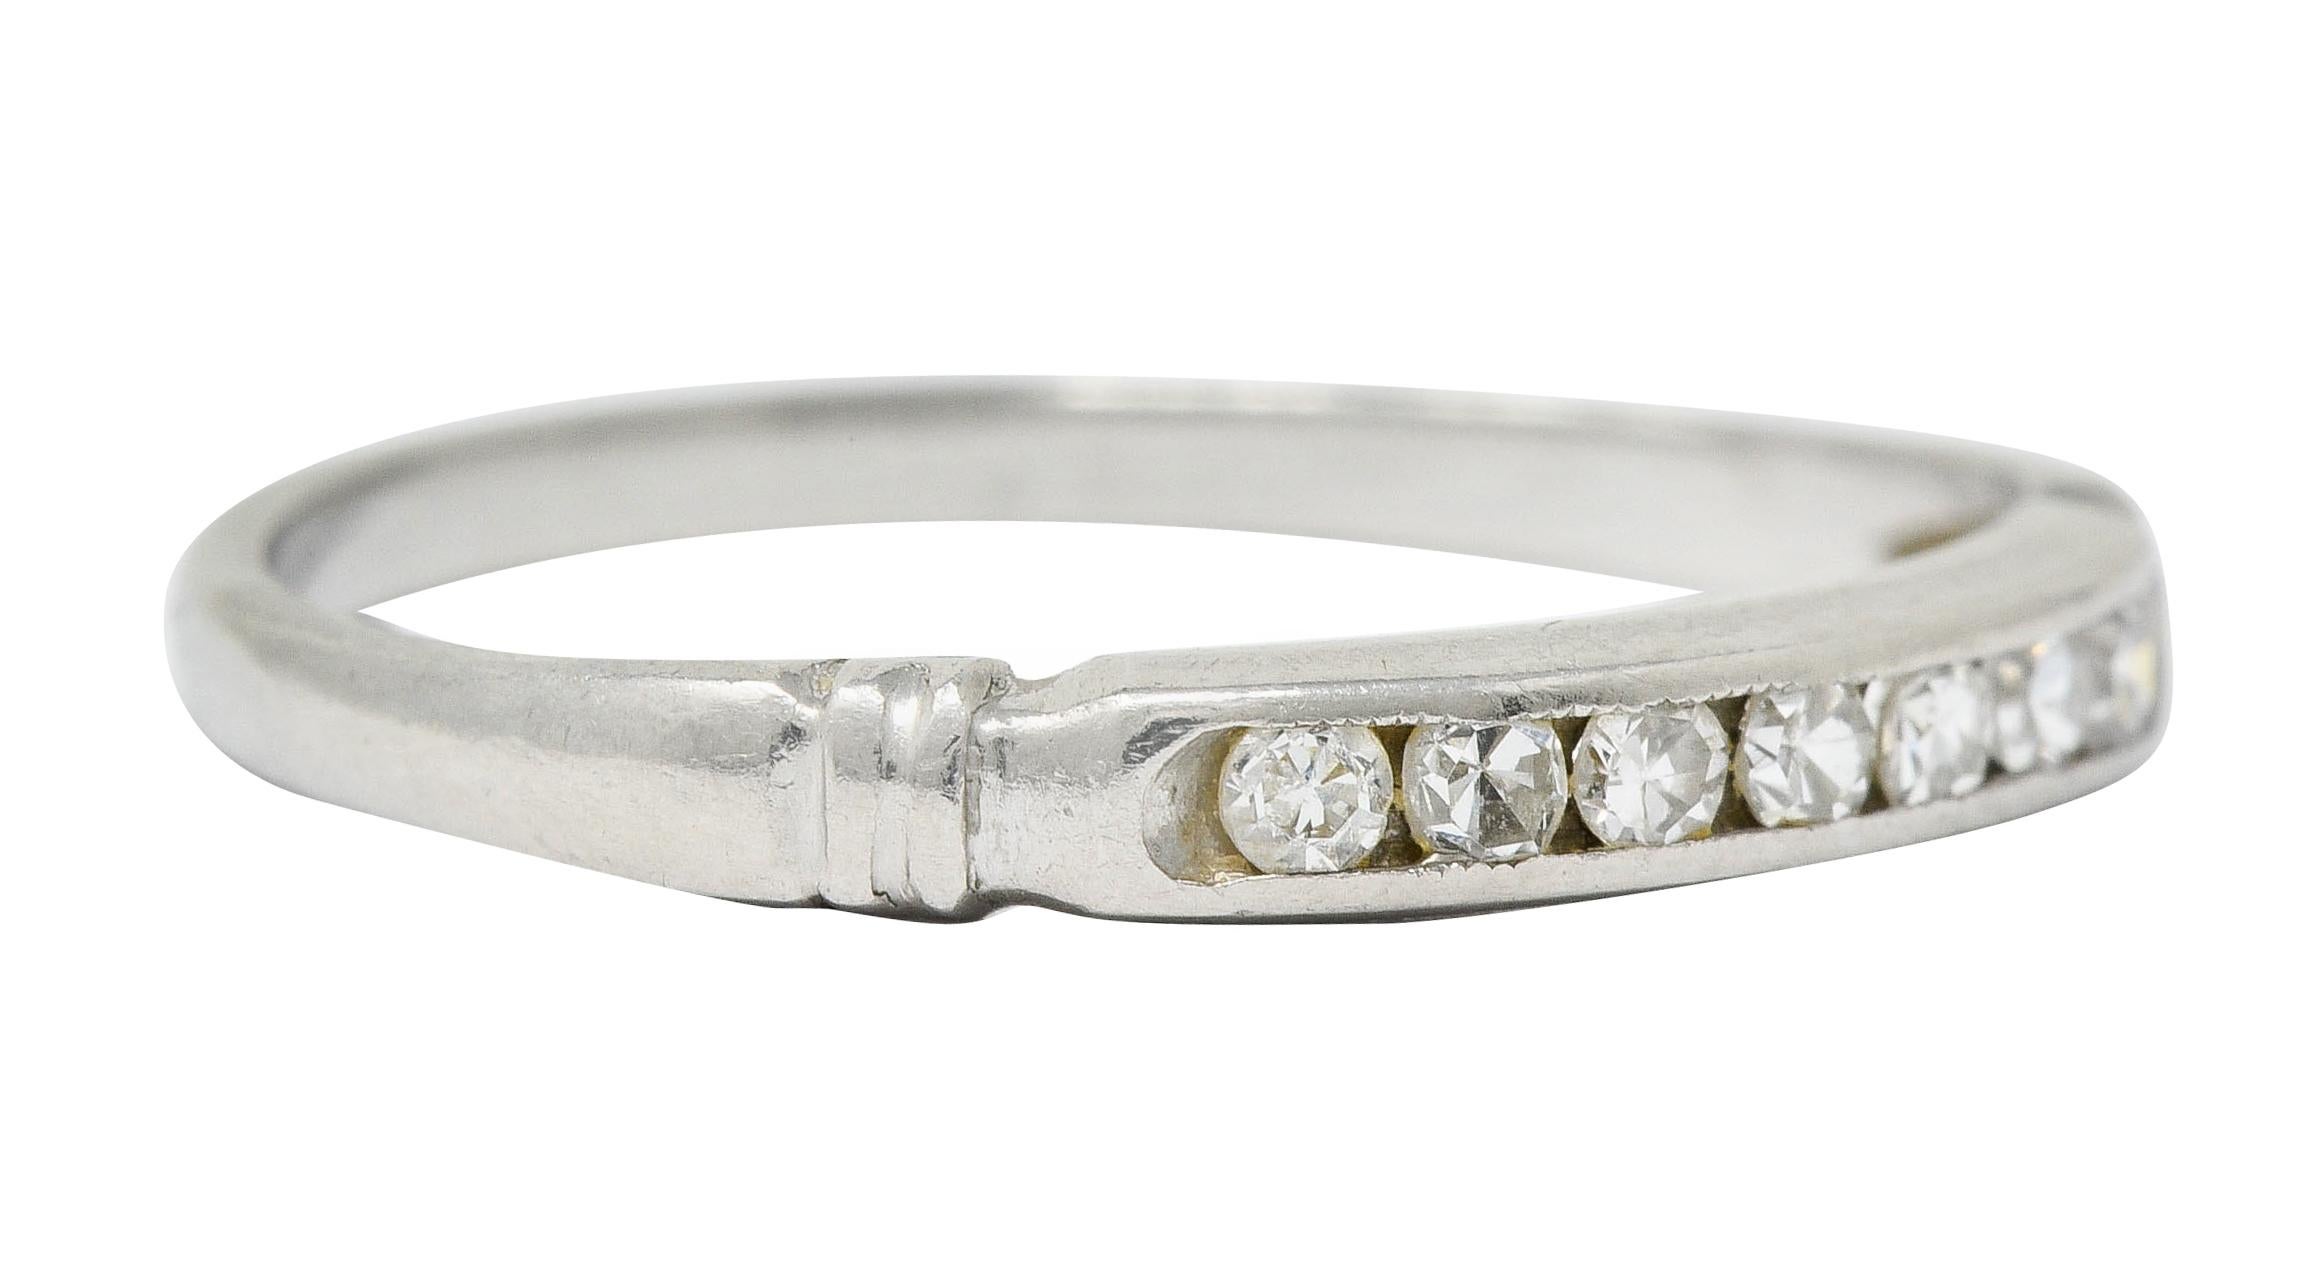 Thin band ring with ribbed shoulders and channel set to front

With seven single cut diamonds weighing in total approximately 0.15 carat; eye-clean and white

Tested as platinum

Circa: 1920s

Ring Size: 6 & sizable

Measures: 2.6 mm wide and sits